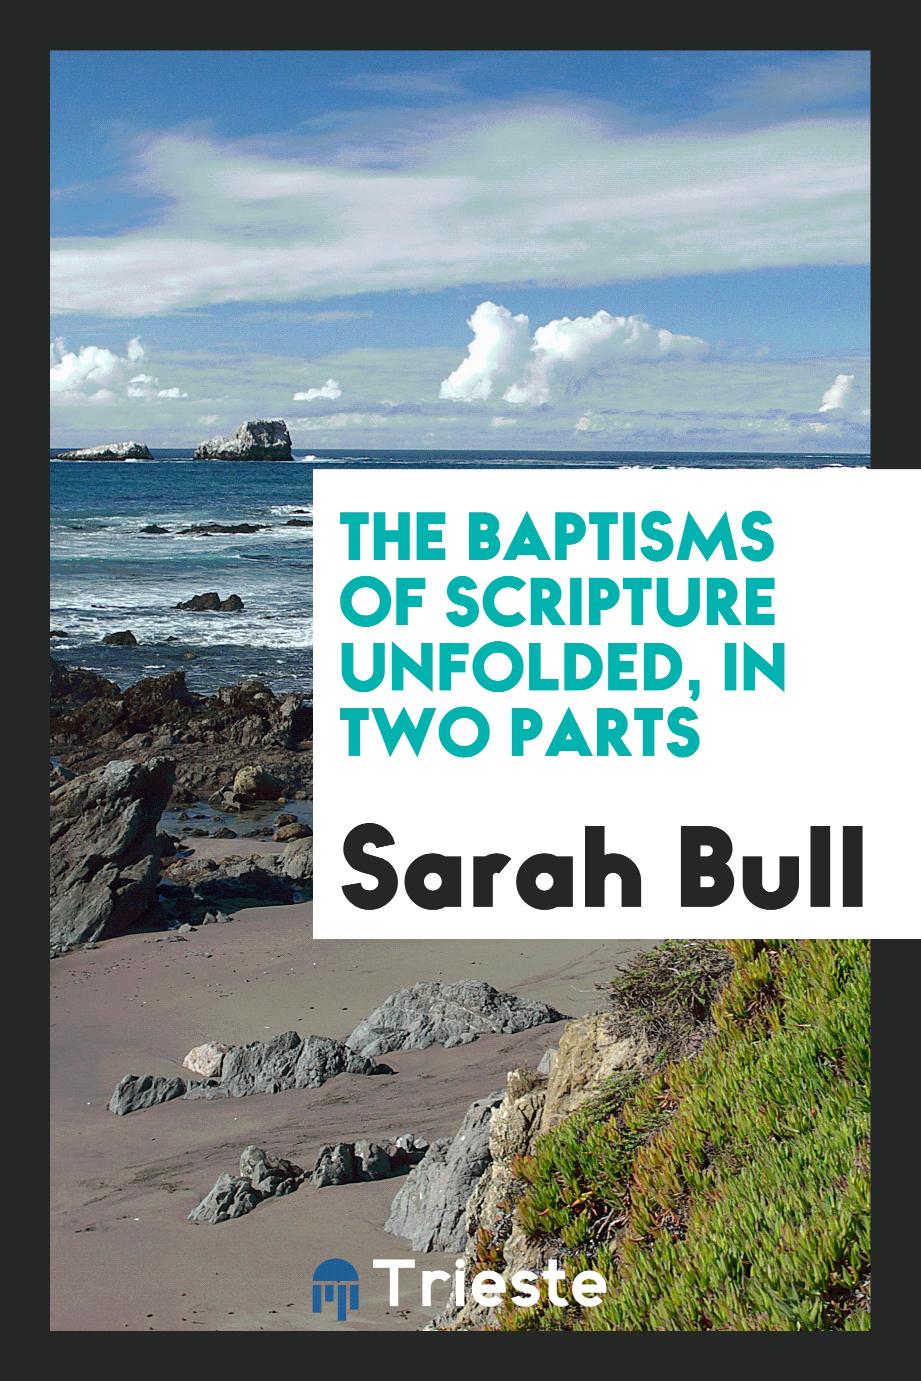 The baptisms of Scripture unfolded, in two parts